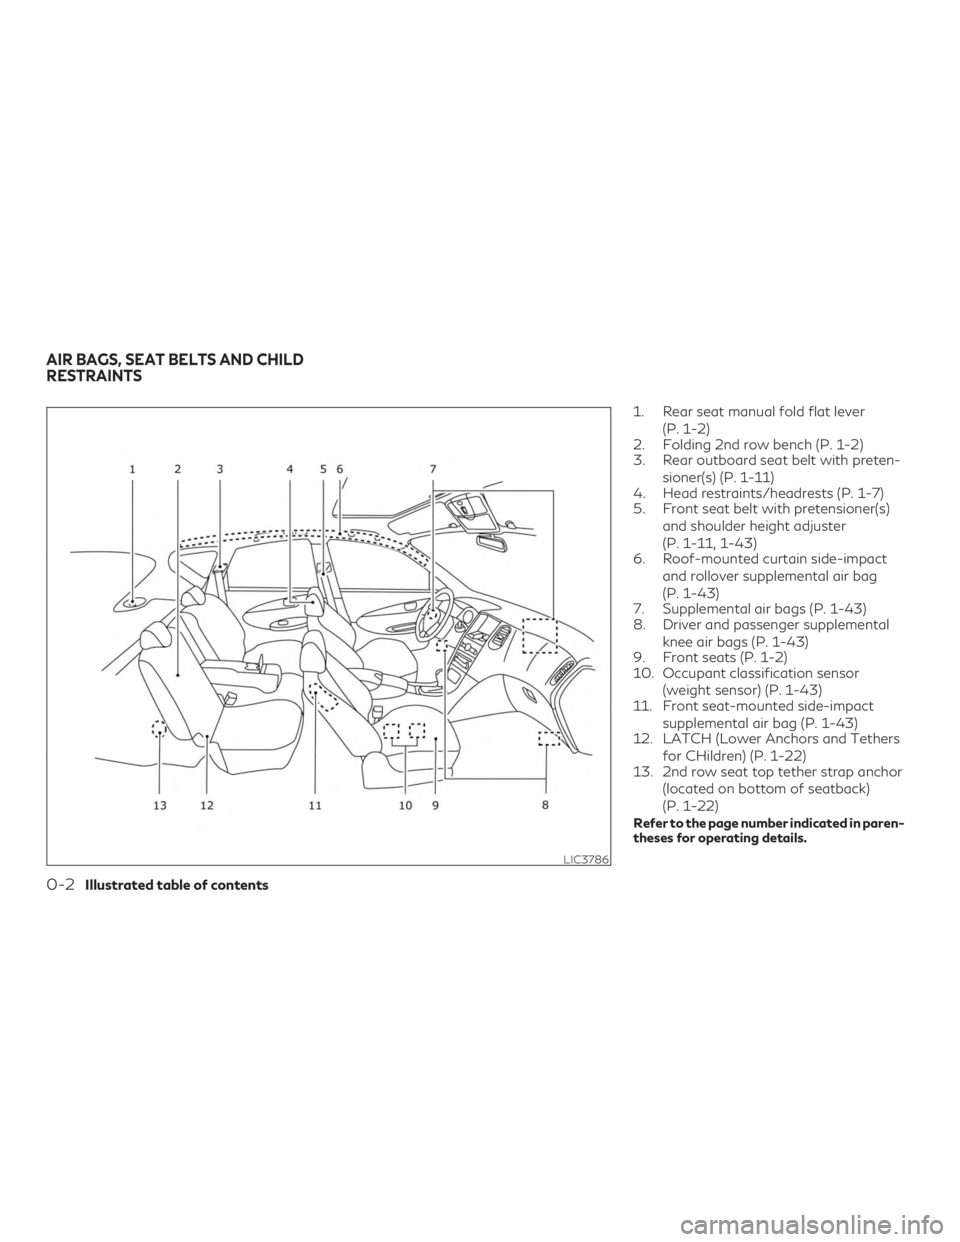 INFINITI QX50 2020  Owners Manual 1. Rear seat manual fold flat lever(P. 1-2)
2. Folding 2nd row bench (P. 1-2)
3. Rear outboard seat belt with preten-
sioner(s) (P. 1-11)
4. Head restraints/headrests (P. 1-7)
5. Front seat belt with 